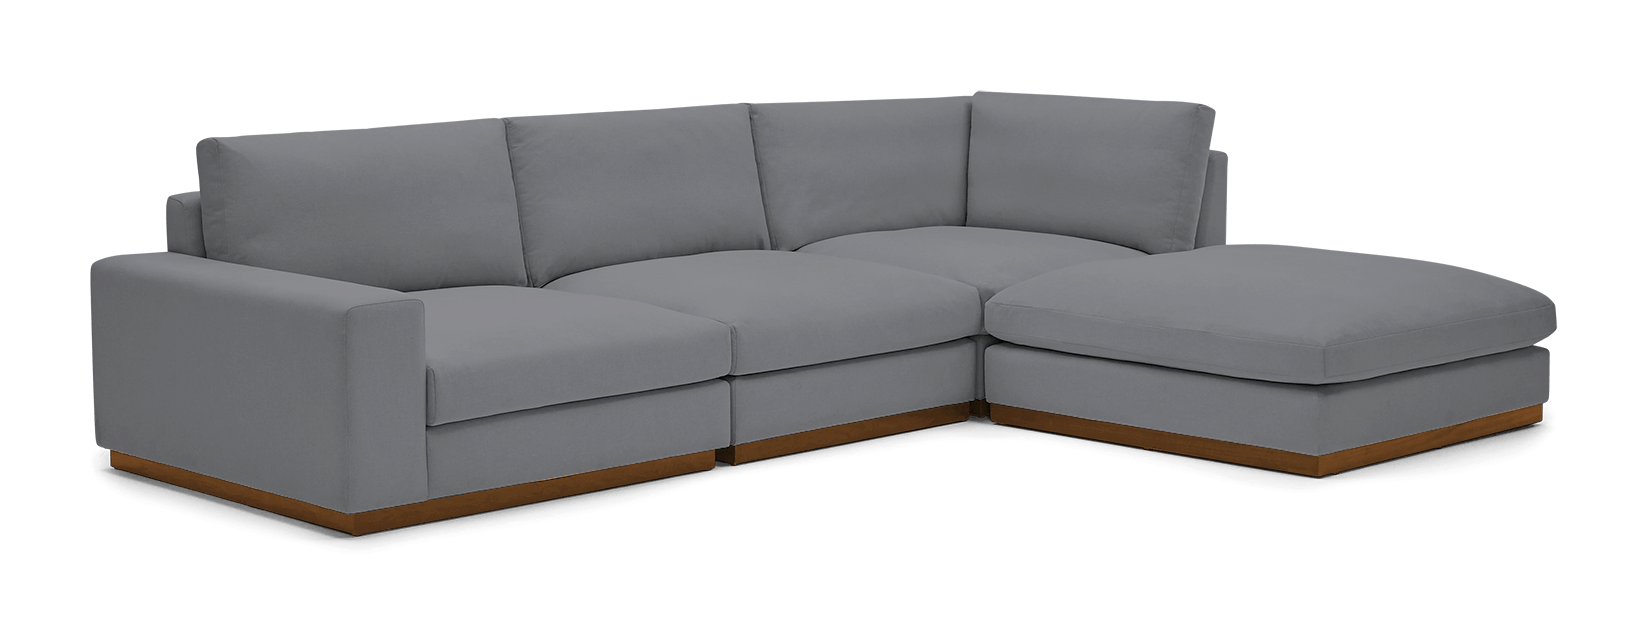 holt modular sectional with bumper essence ash